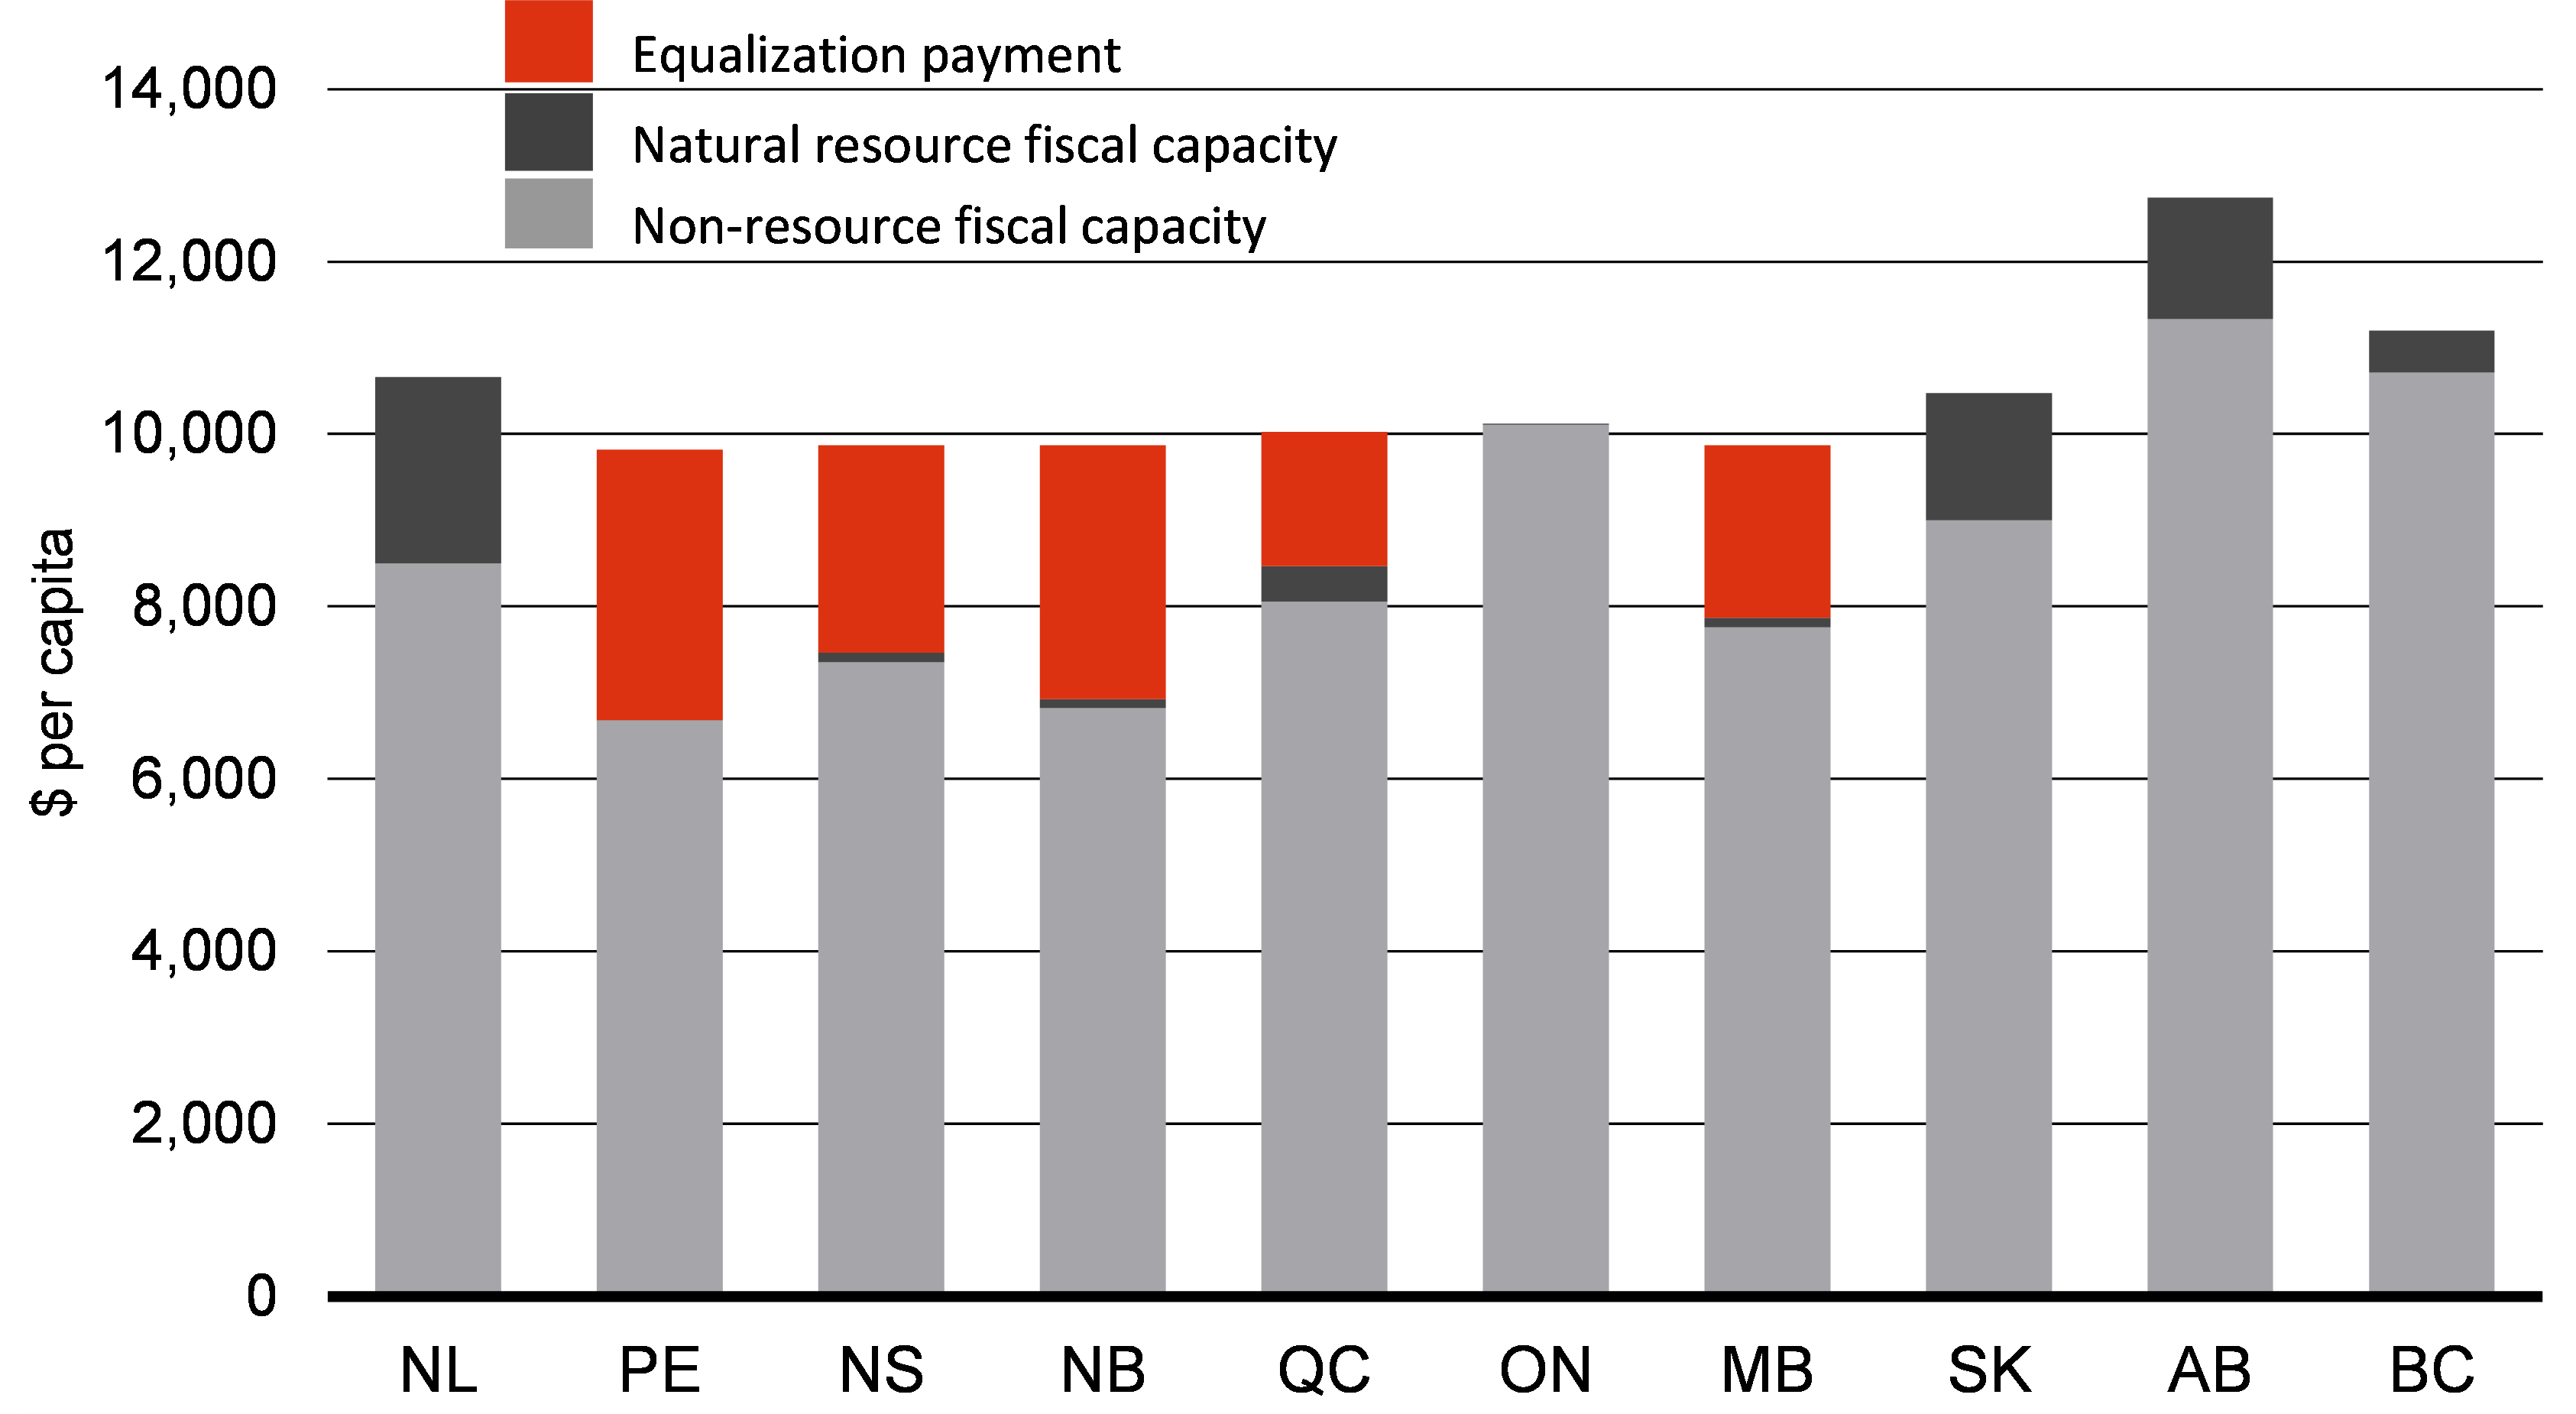 Chart 1: Equalization helps provinces with below average fiscal capacity 
2021-22* 
